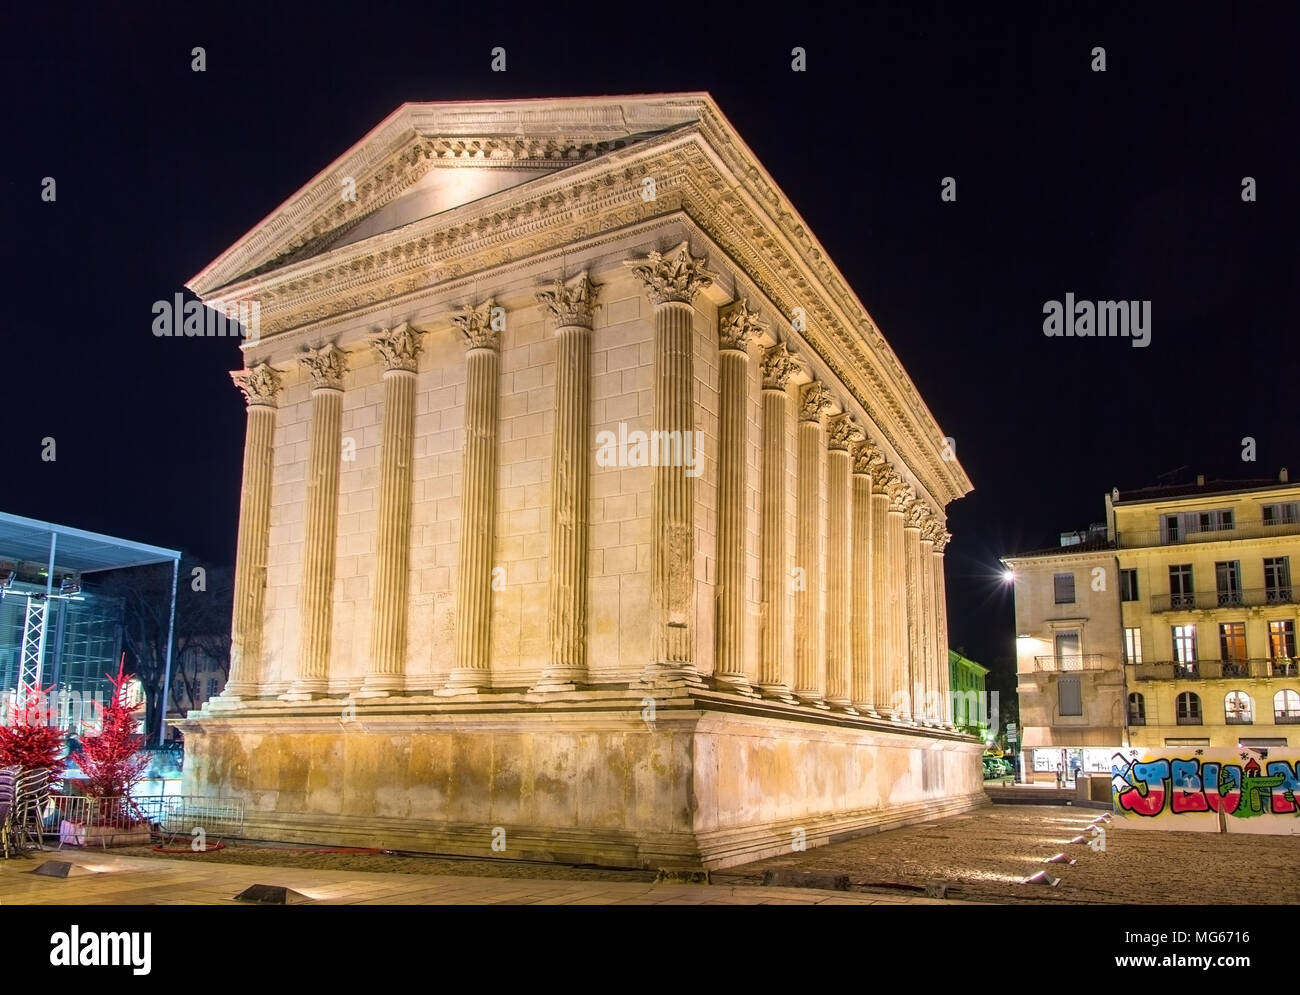 Maison Carree, a Roman temple in Nimes, France Stock Photo